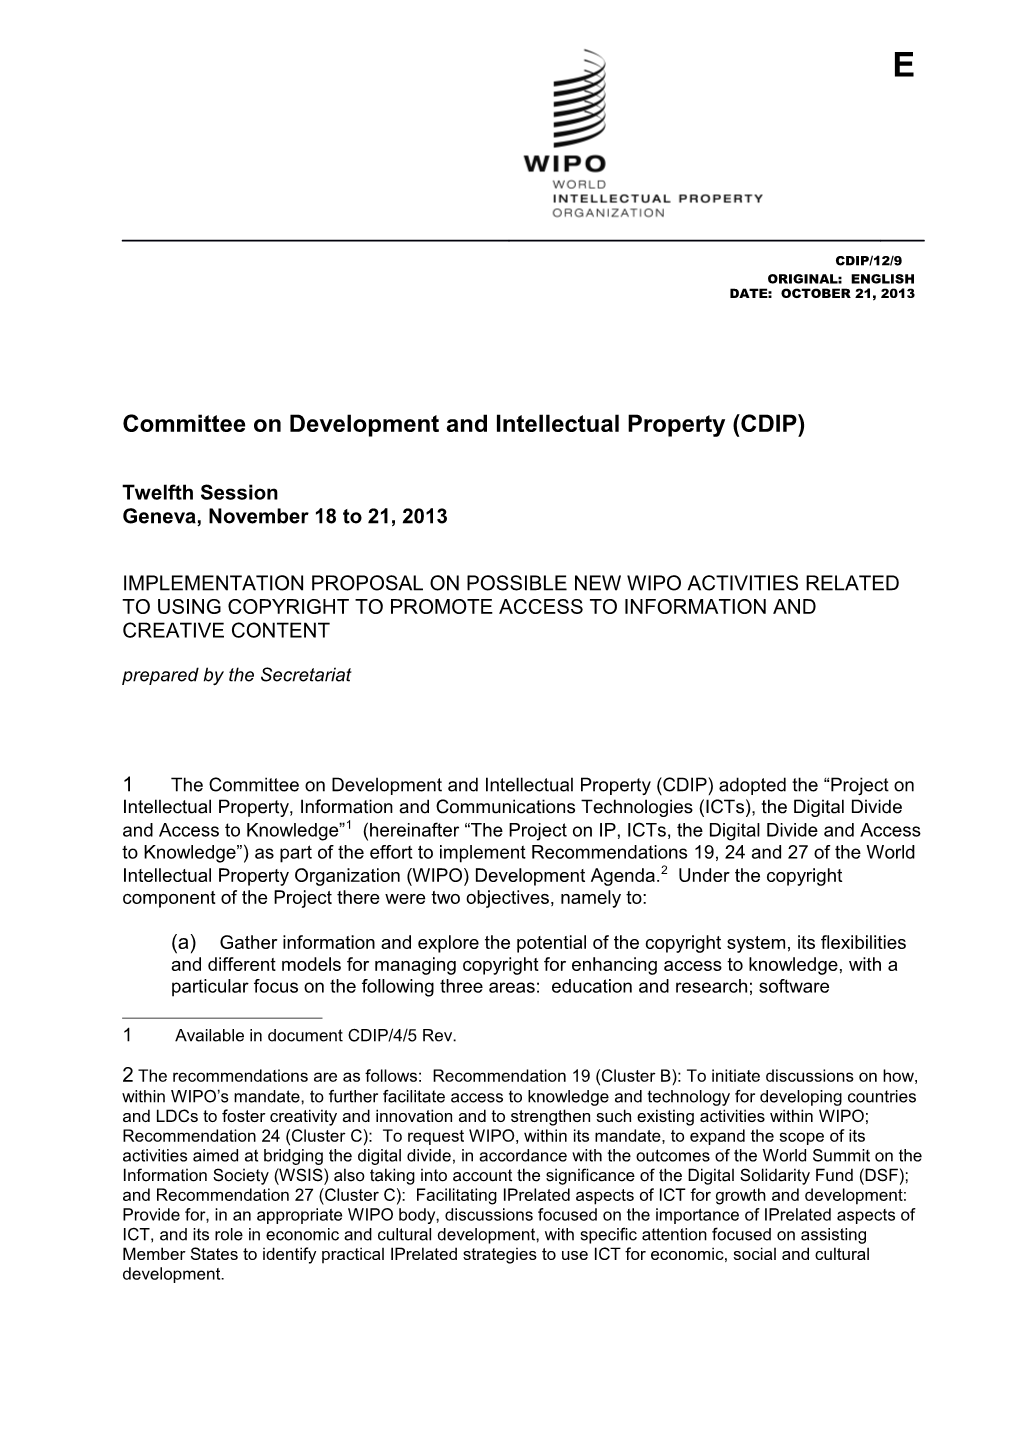 Committee on Development and Intellectual Property (CDIP) s6